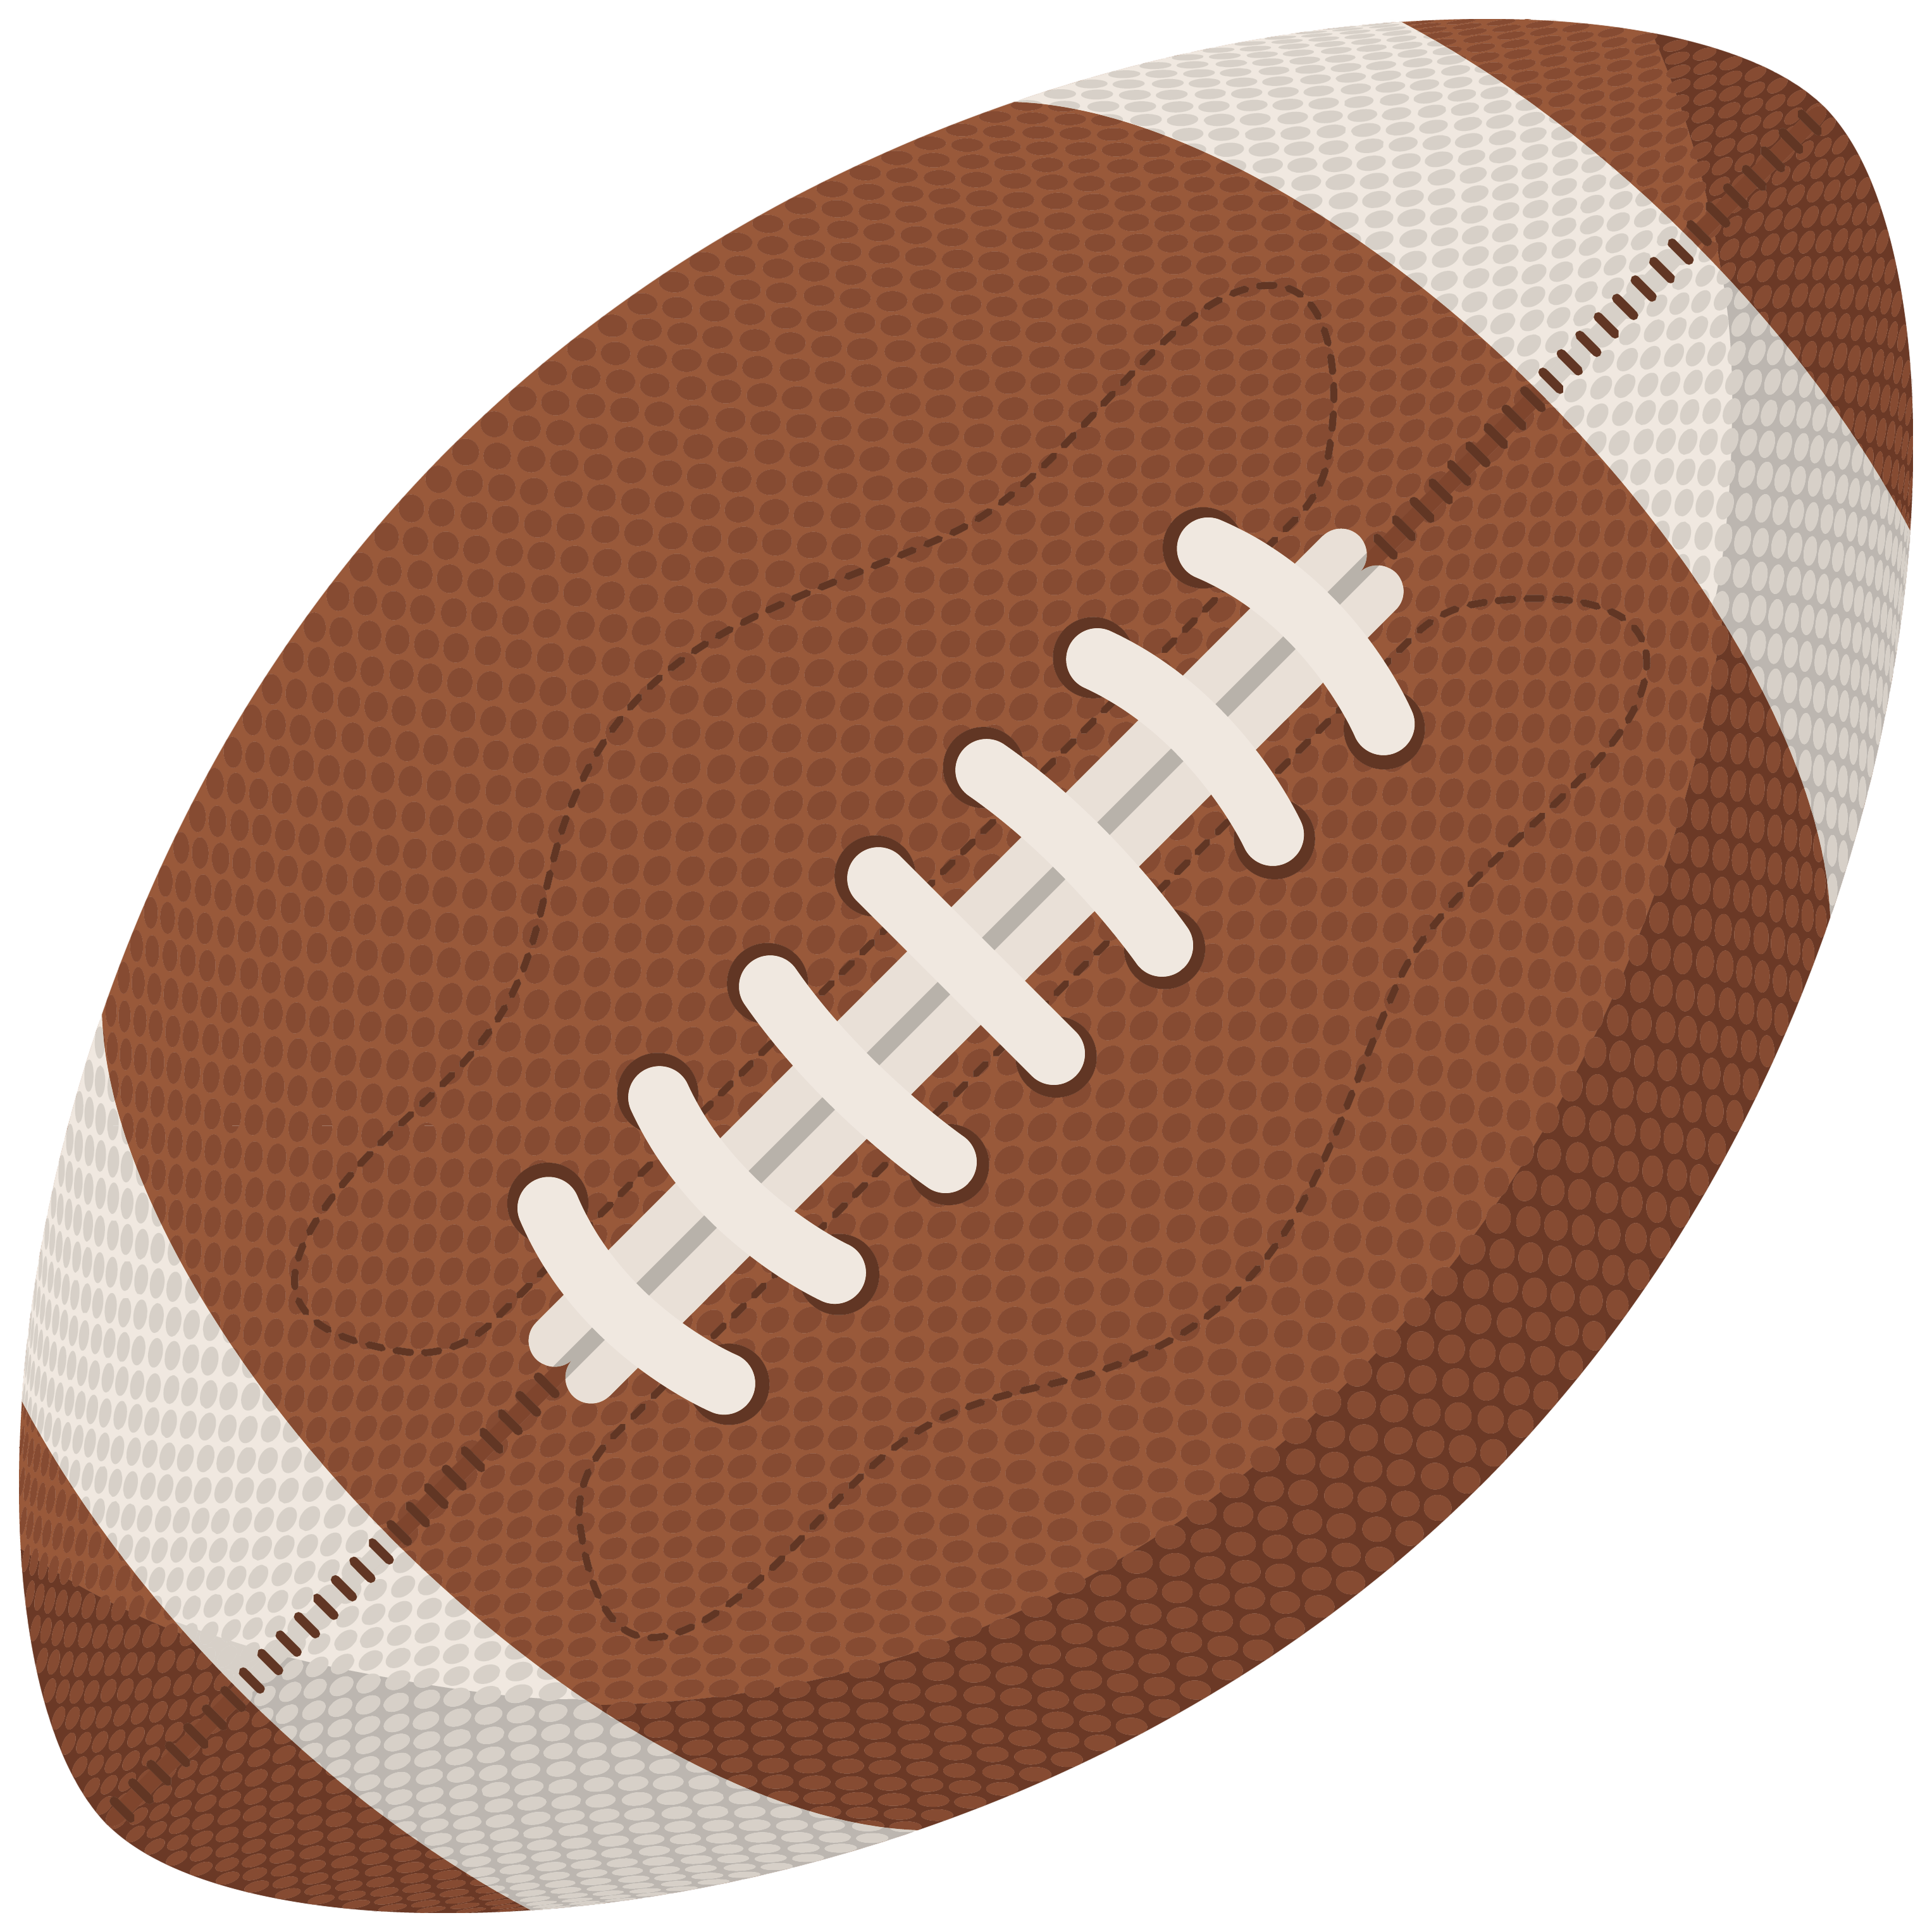 Worn out American football with white laces Clipart